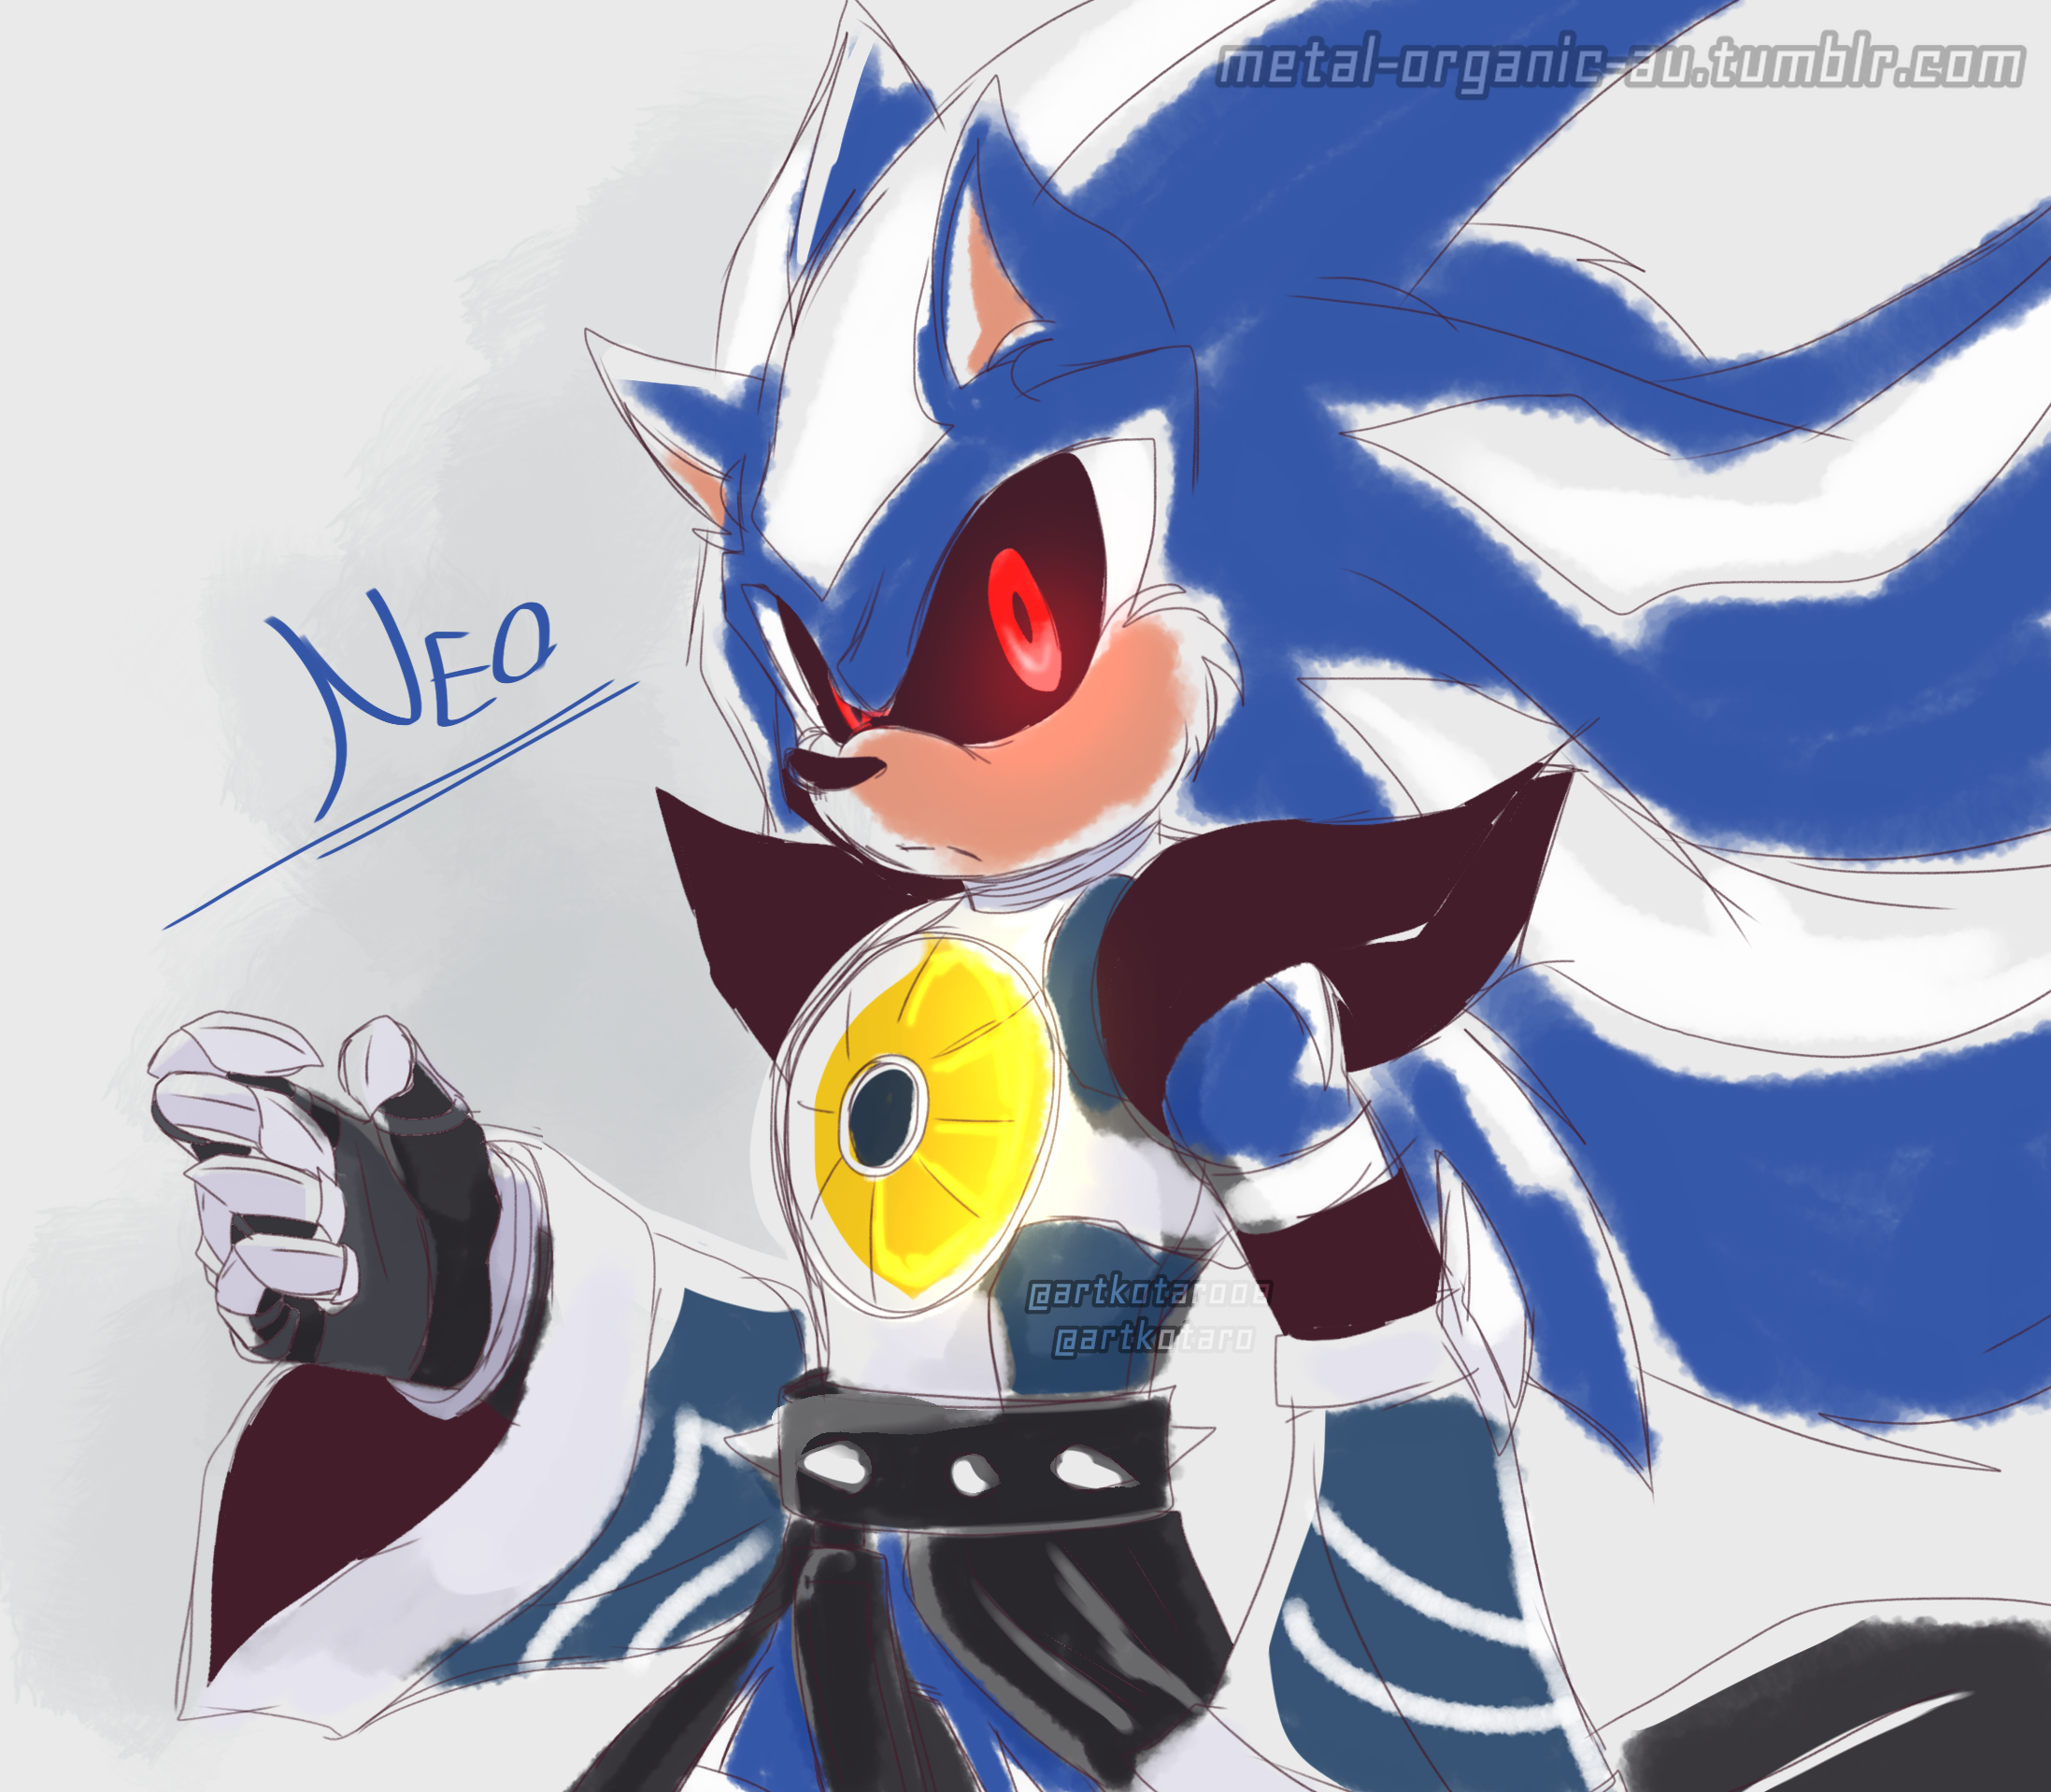 Organic! Neo Metal by Cutting-the-Wires on DeviantArt